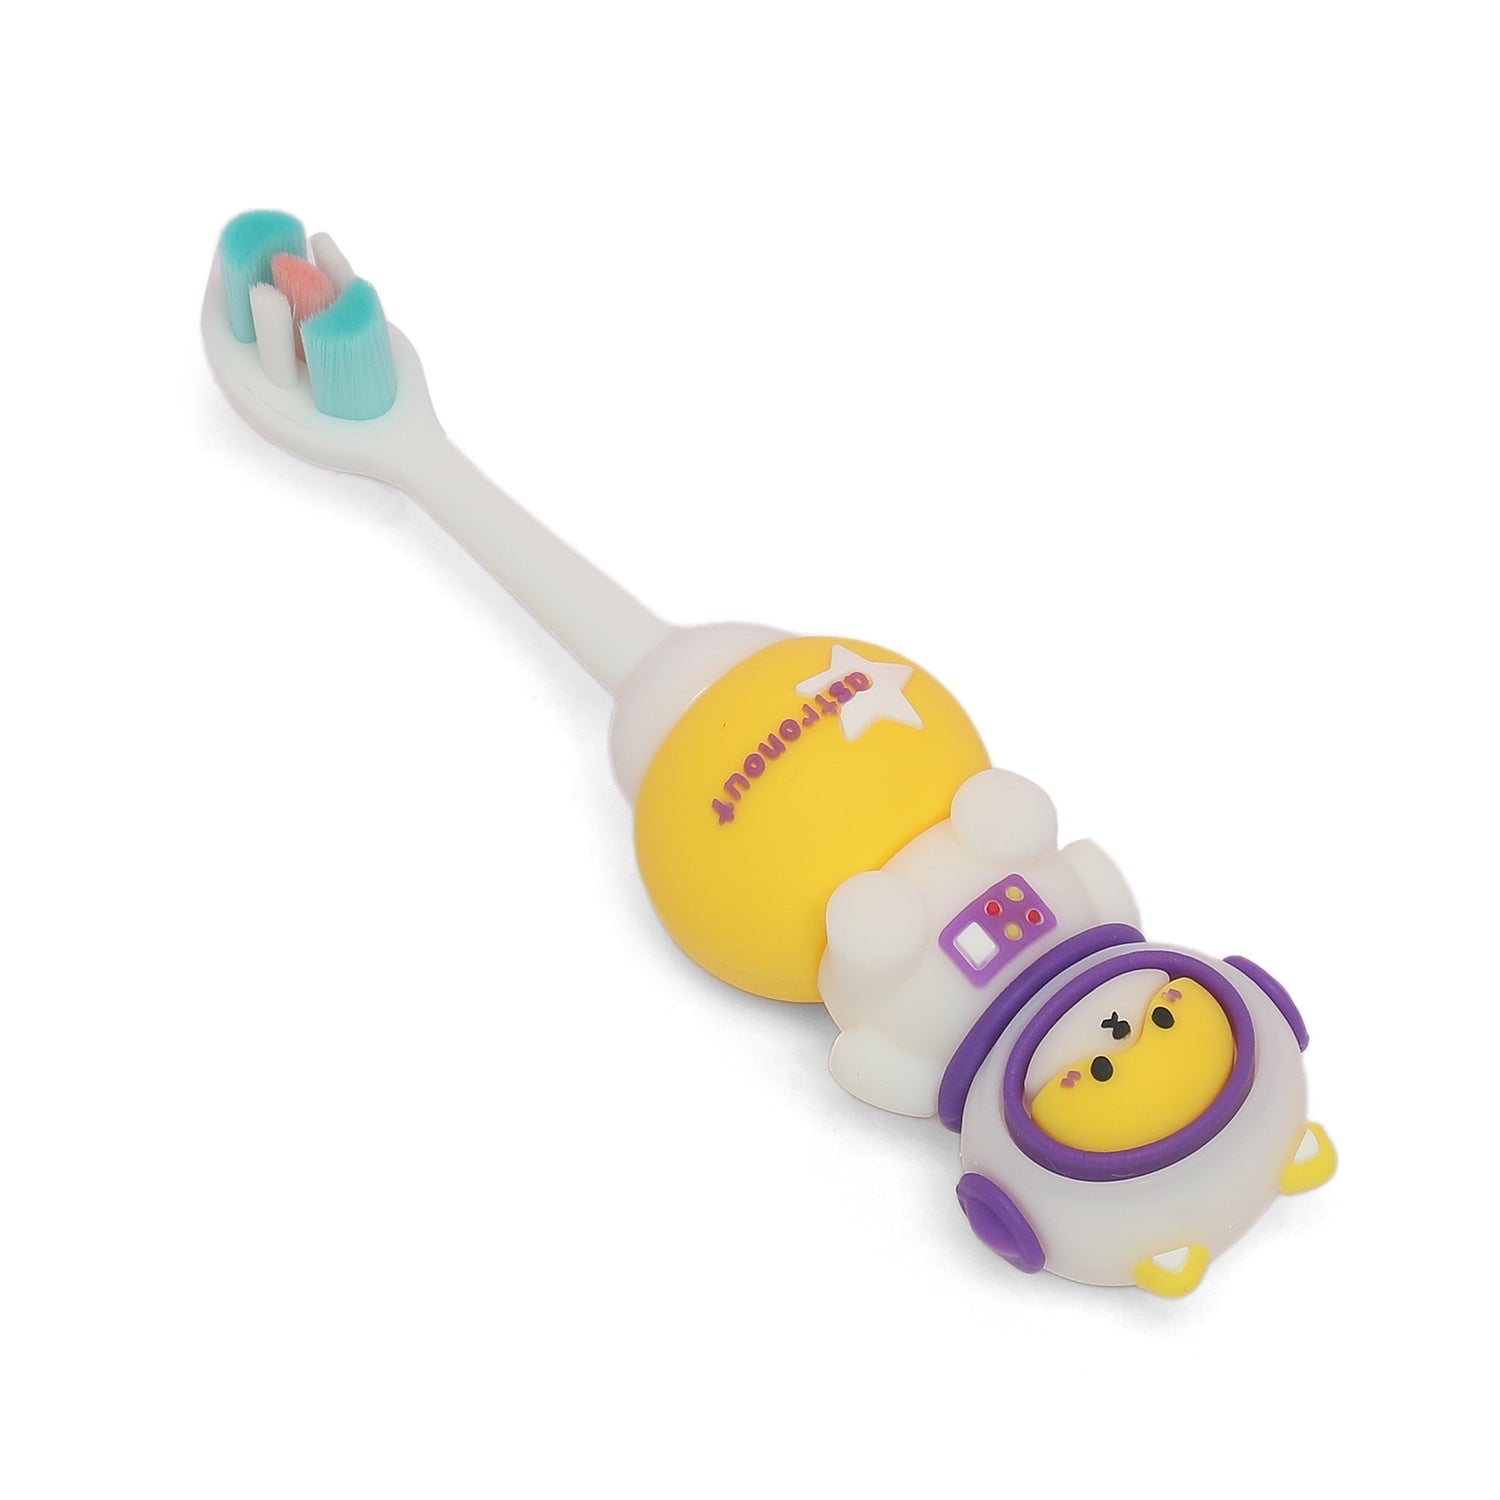 ZORSE baby toothbrush special curated for your child's teeth in style 2-7 year olds (random space bear-print)